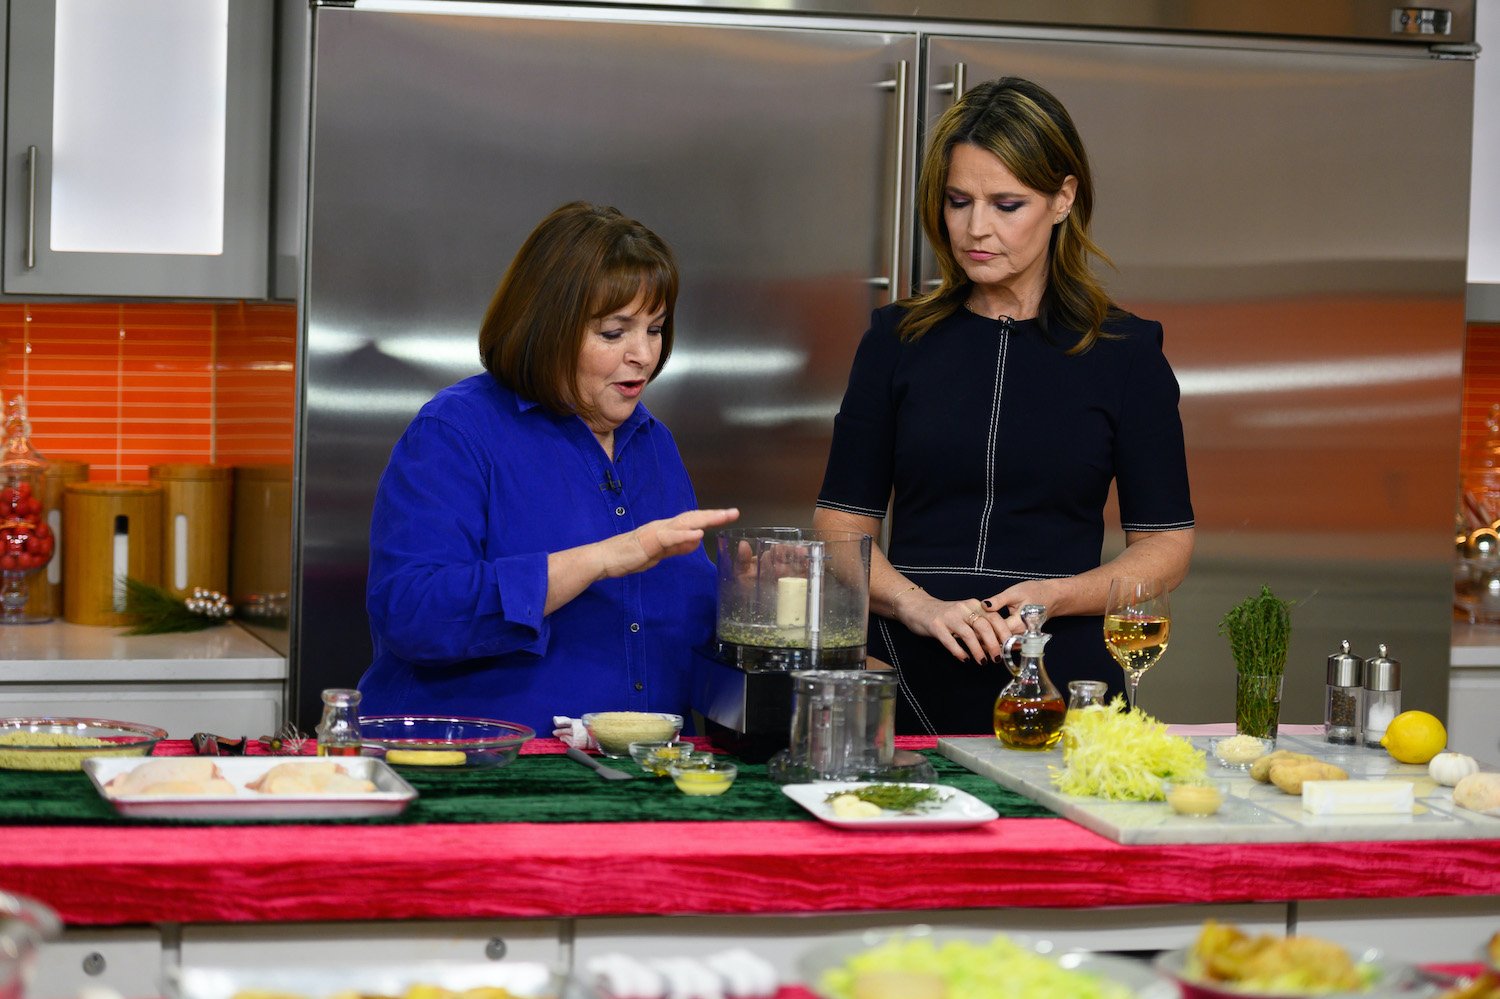 Ina Garten uses a food processor on the Today show during a cooking segment with Savannah Guthrie